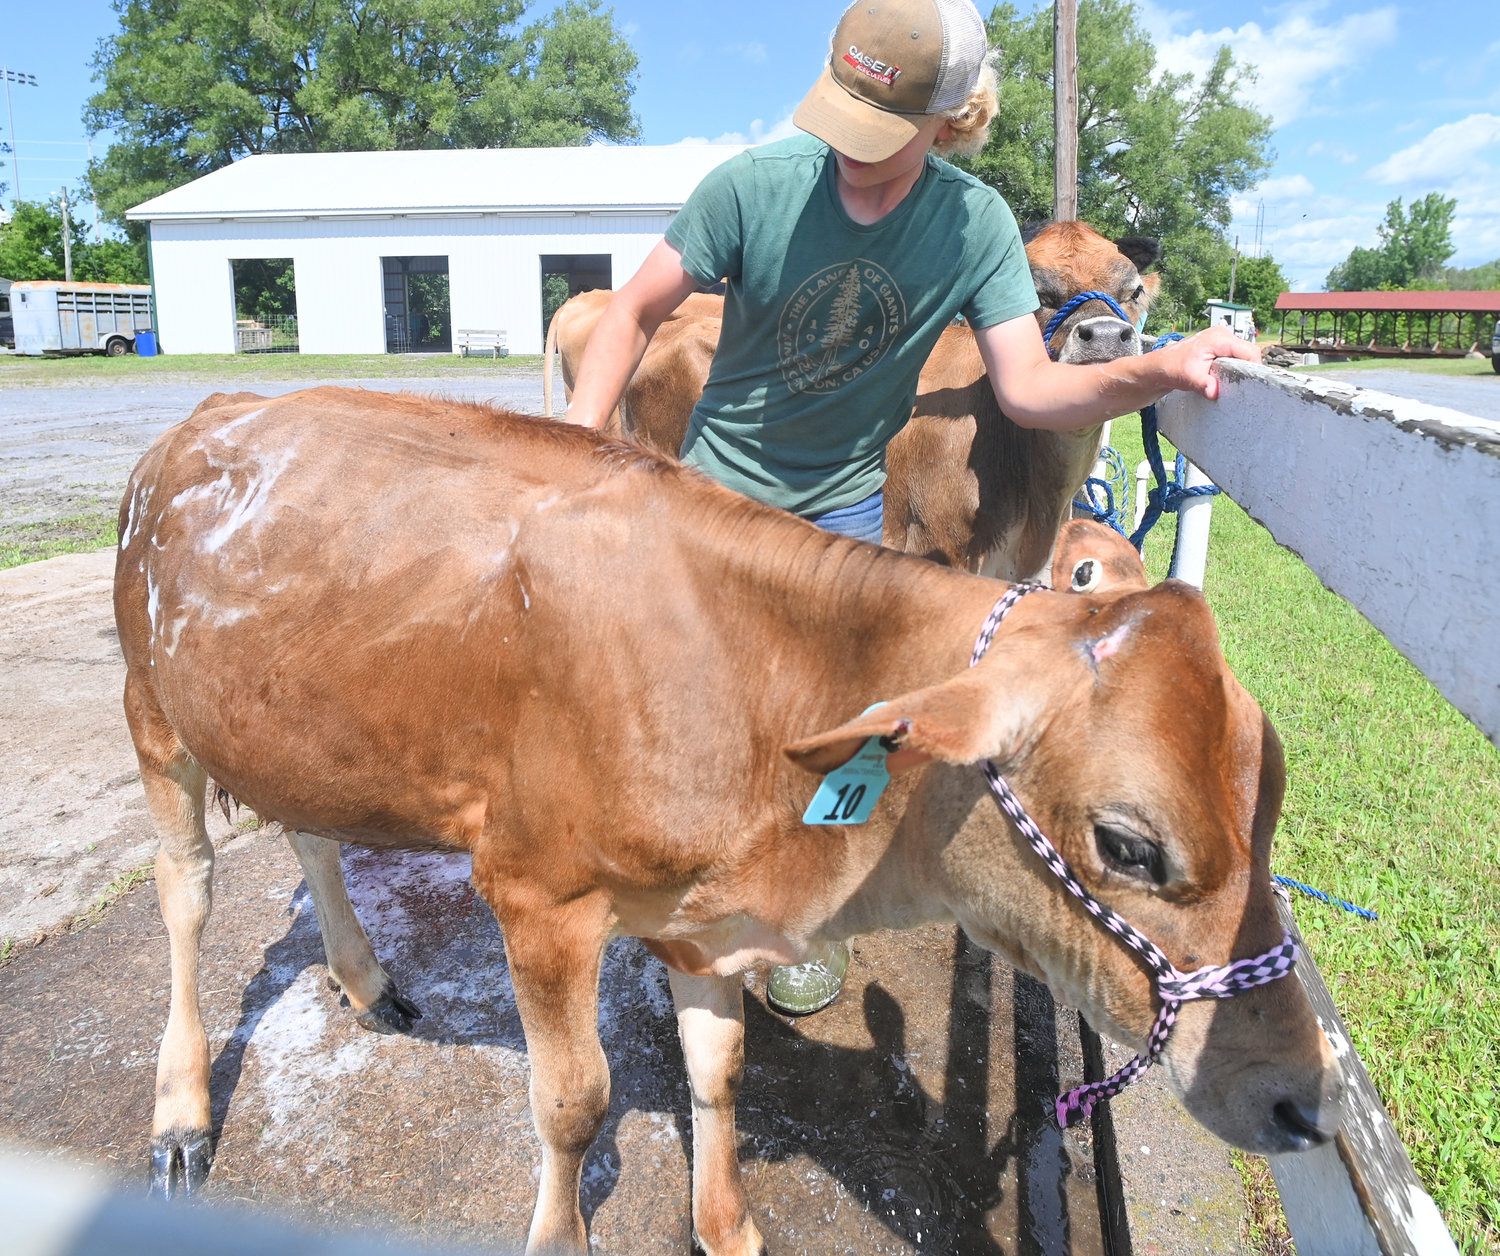 Elliott Meays, 15, cleans up a brown Swiss calf named Molly on Monday at the Boonville-Oneida County Fair. The fair officially started on Tuesday and runs through Sunday.